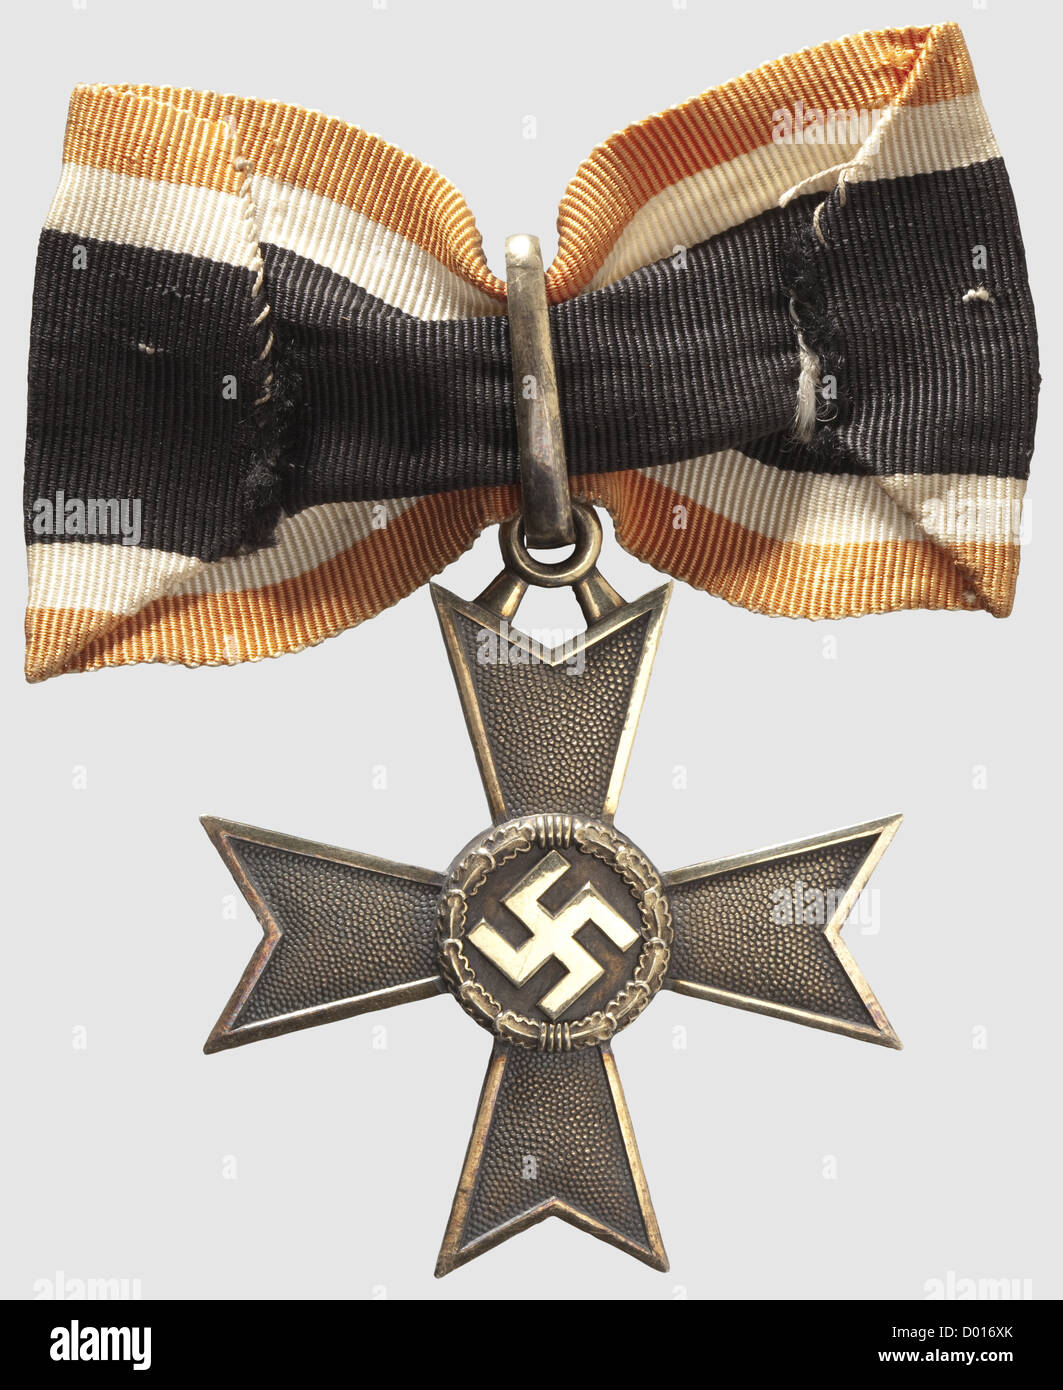 A Knight's Cross of the War Merit Cross of 1939 in Gold,Gold-plated silver,the edges and raised areas polished.Smooth,closed suspension ring,the lower cross-arm punched '900' and '20'(for Zimmermann,Pforzheim).Typical shallow,roughly de-burred Zimmermann issue.Dimensions ca.53 x 59.8 mm,weight 30.5 g.With a ribbon segment ca.80 mm in length(Nie 7.04.01).The gold class was instituted on 8 July 1944 and only produced in very small numbers.Just two bestowals are known to have occurred.This example comes from the awards hoard hidden by the Orders ,Additional-Rights-Clearences-Not Available Stock Photo